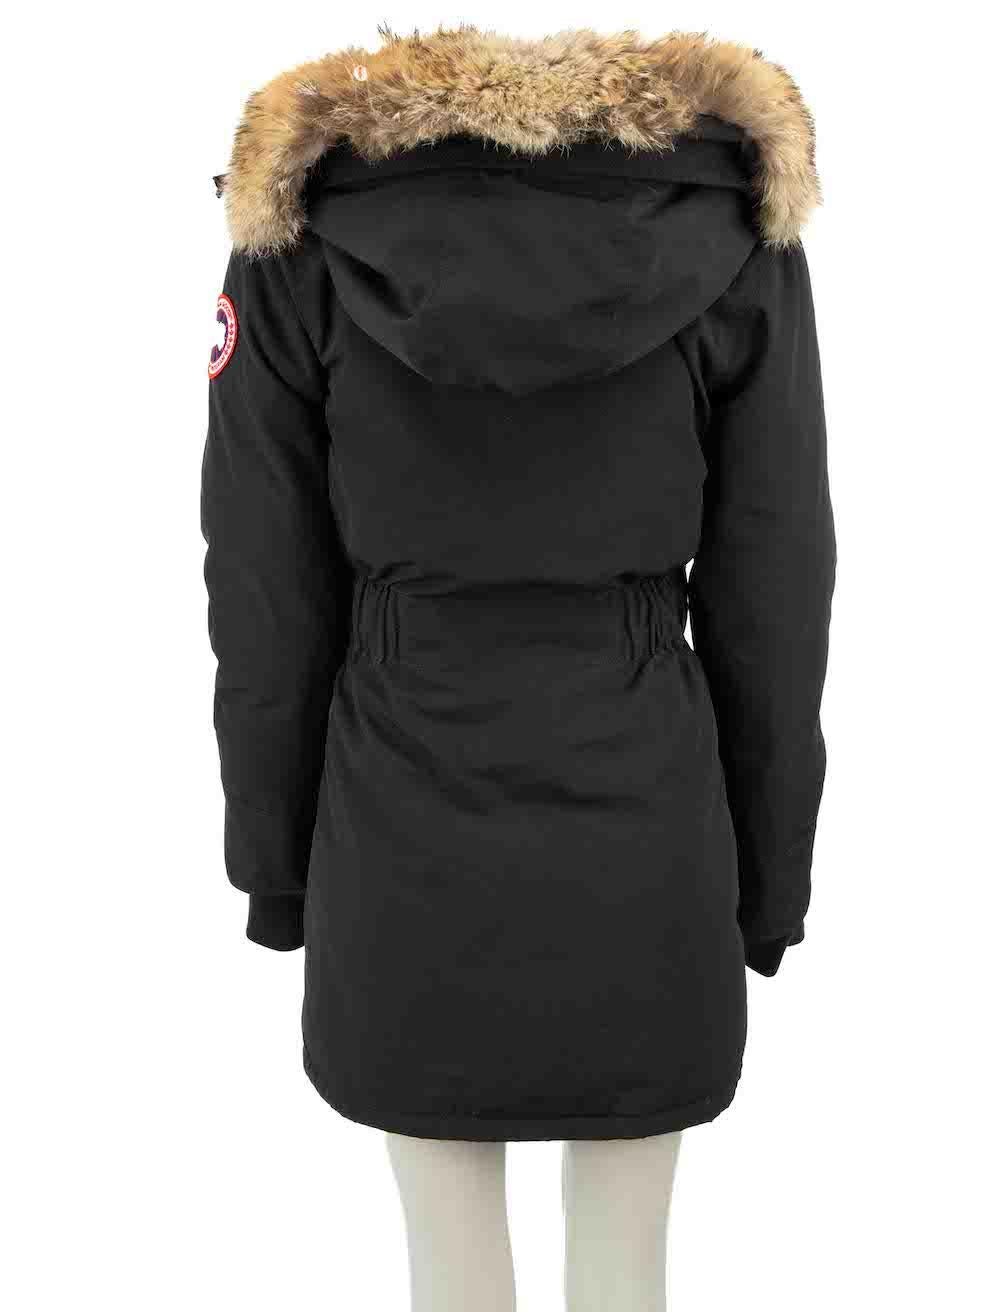 CONDITION is Very good. Minimal wear to coat is evident. Minimal fading to fabric on inner arms on this used Canada Goose designer resale item.
 
 Details
 Black
 Polyester
 Parka coat
 Fur trim hood
 Detachable hood and fur trim
 Zip and snap